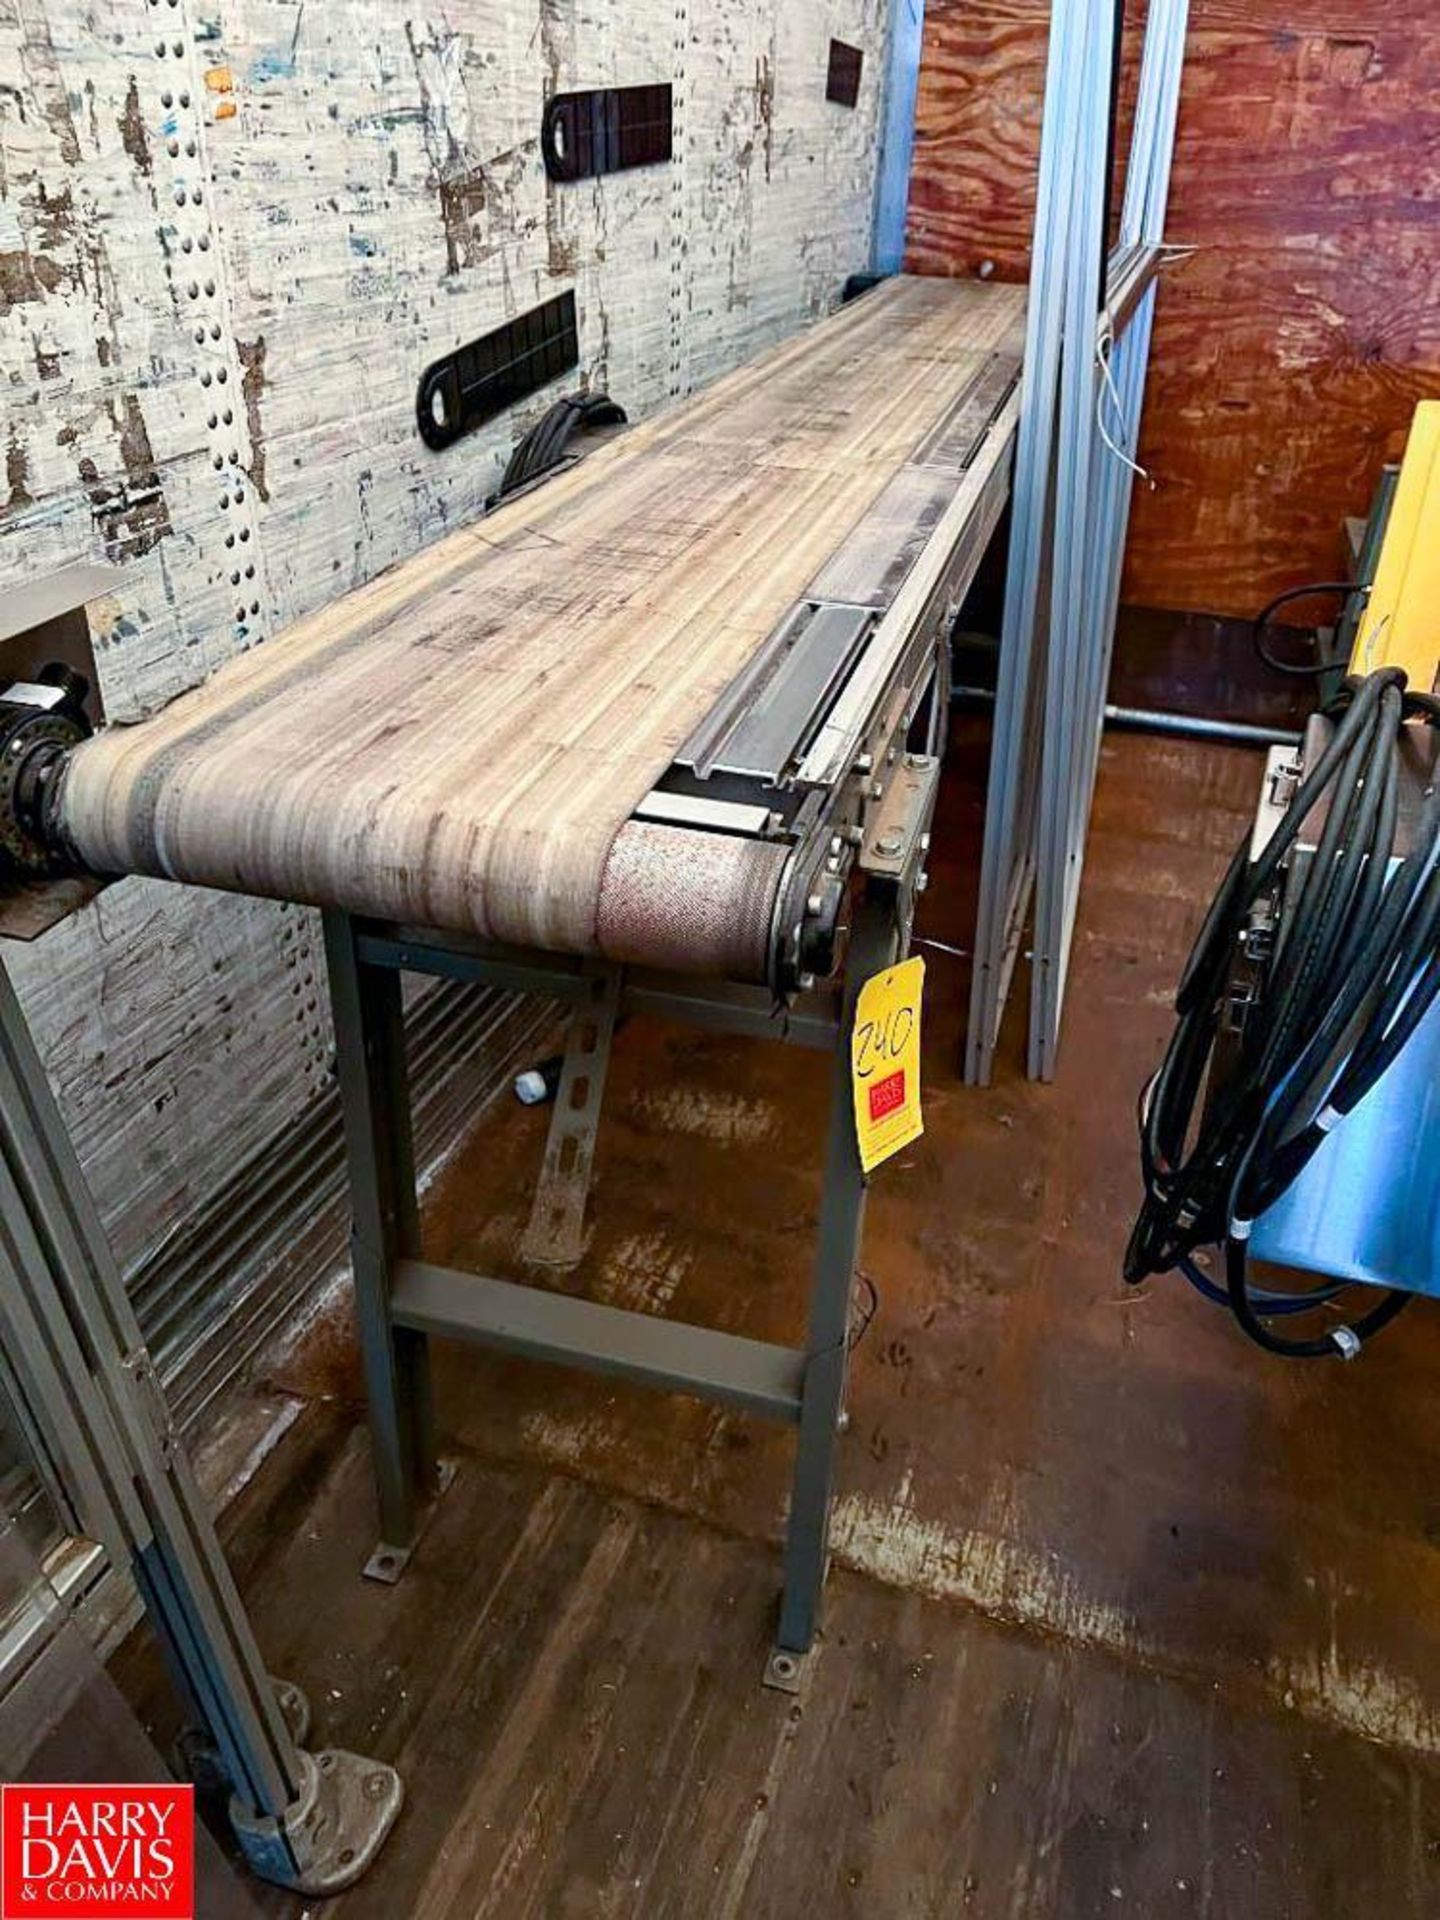 S/S Framed Belt Conveyor with Drive and Controls, Dimensions = 10' x 1' (Location: Louisville, OH)